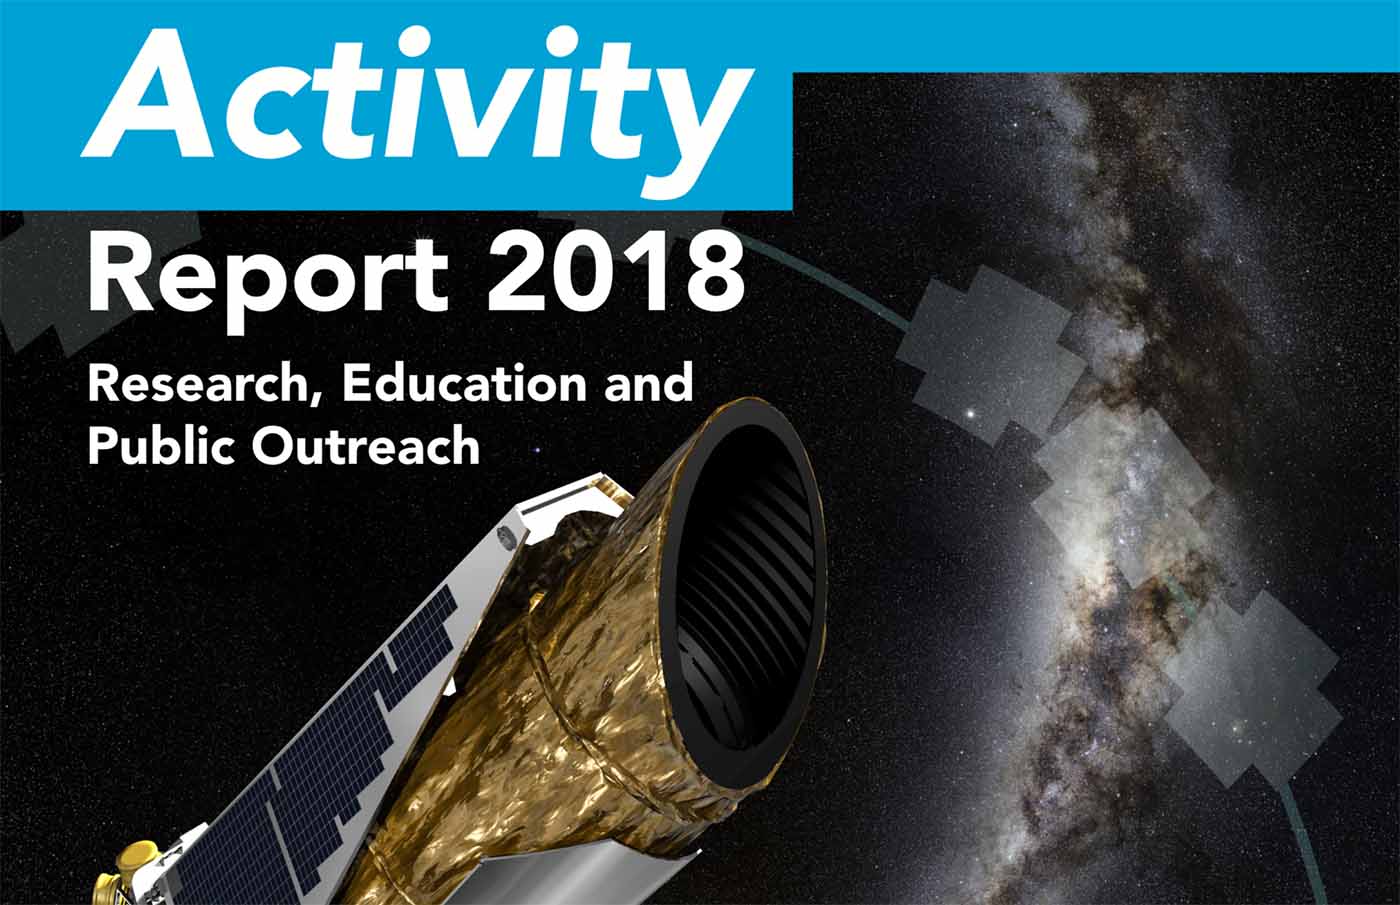 Front cover of The SETI Institute's Activity Report for 2018